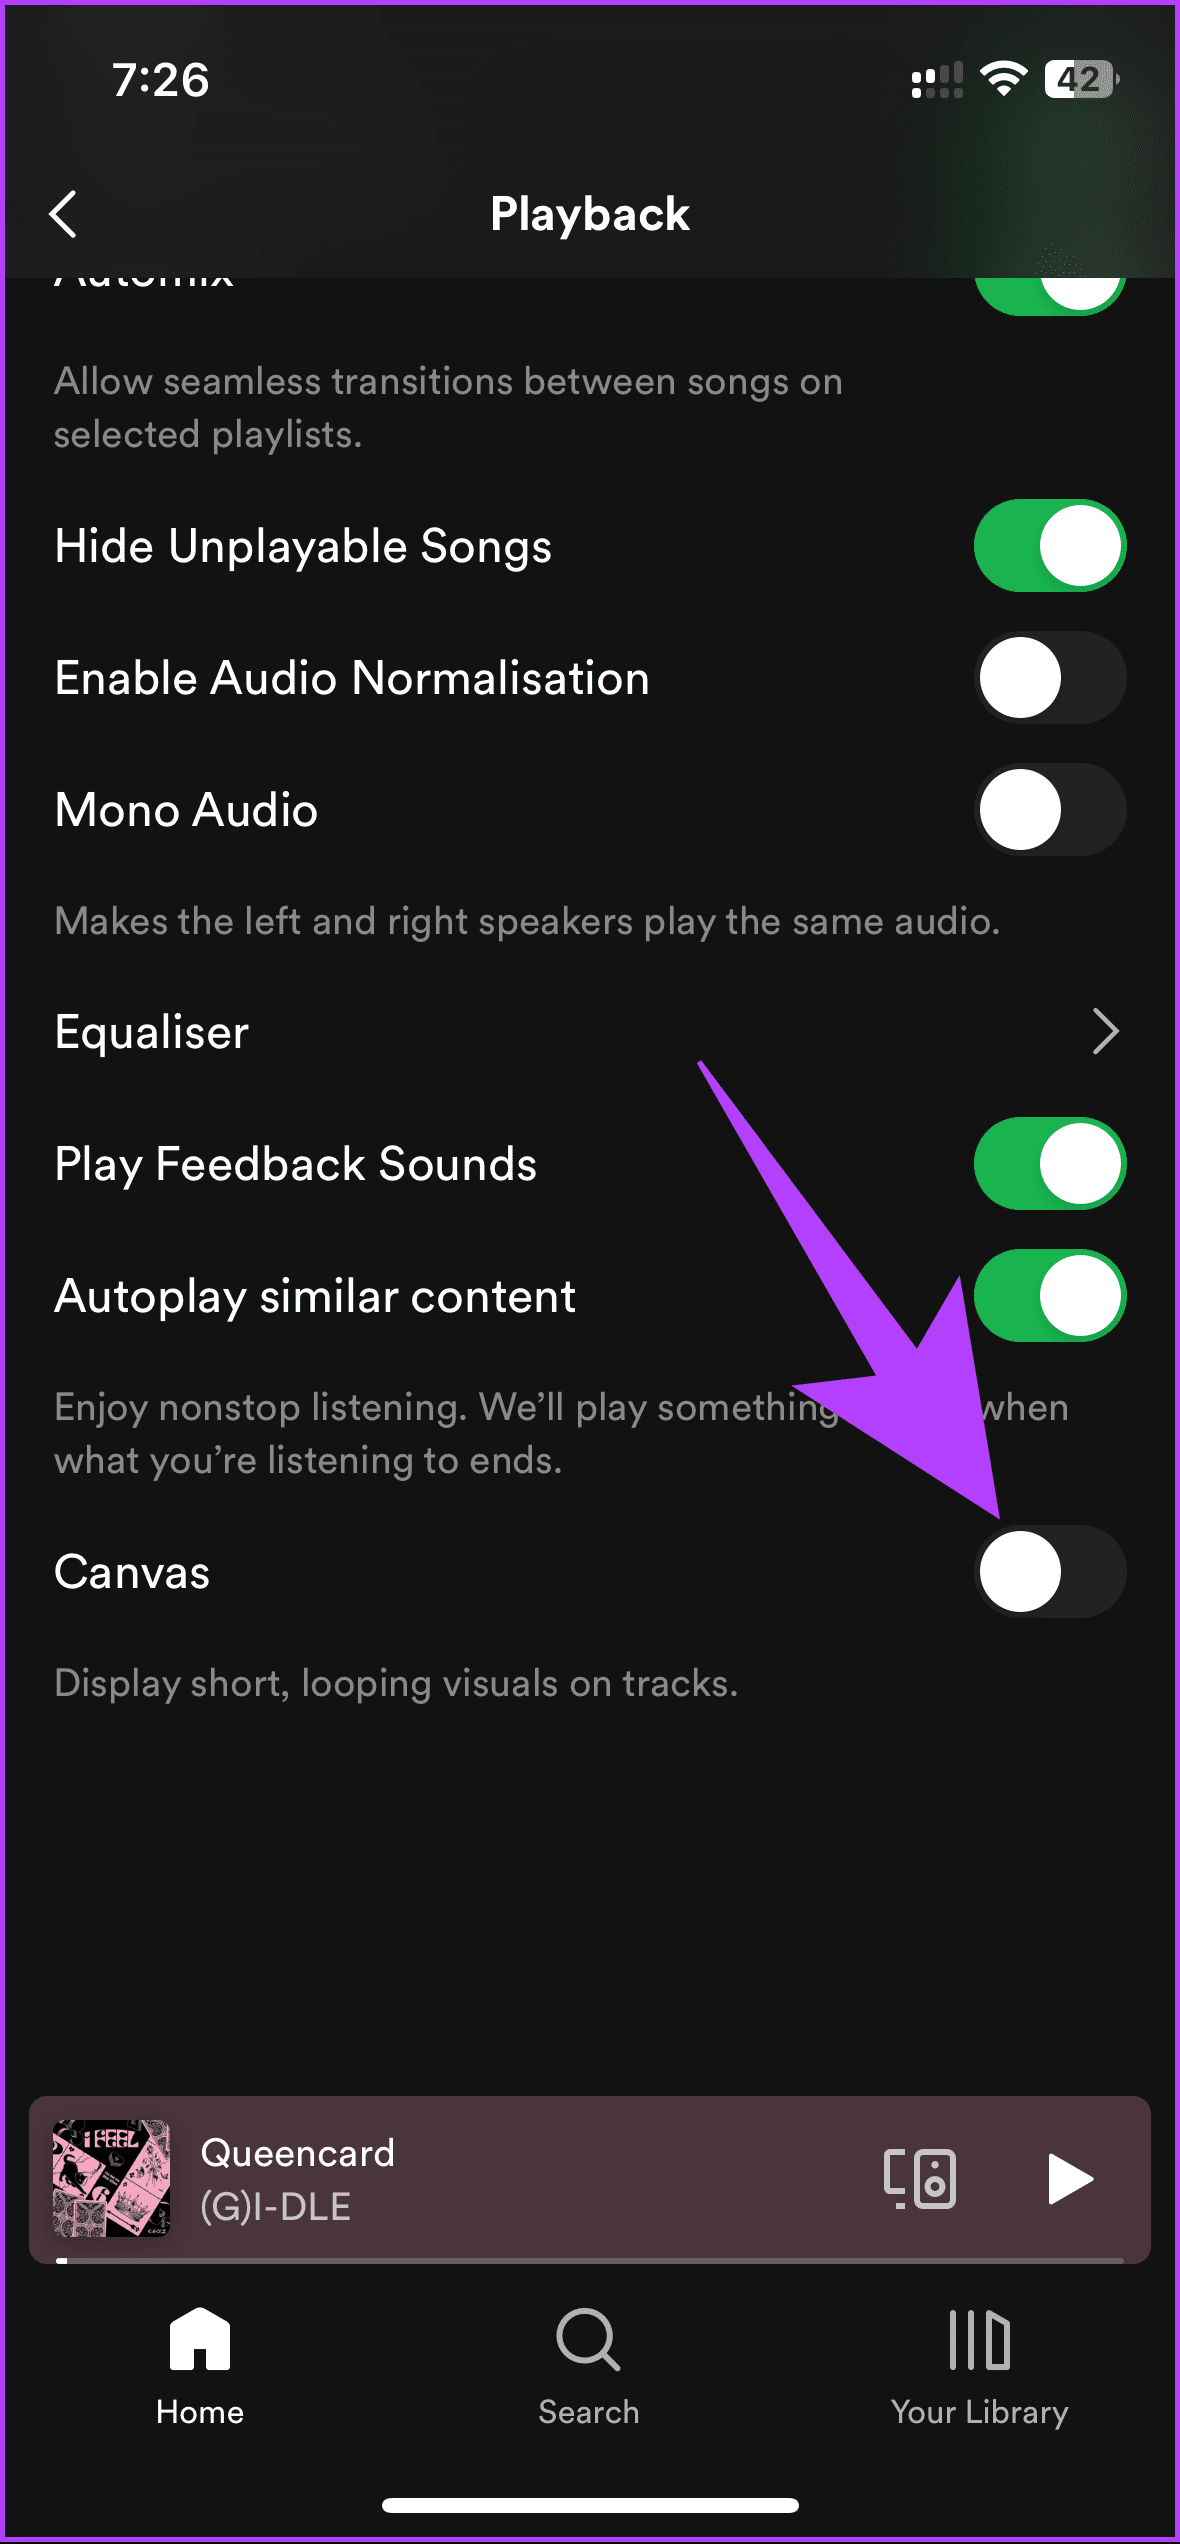 tap on the button adjacent to the Canvas option